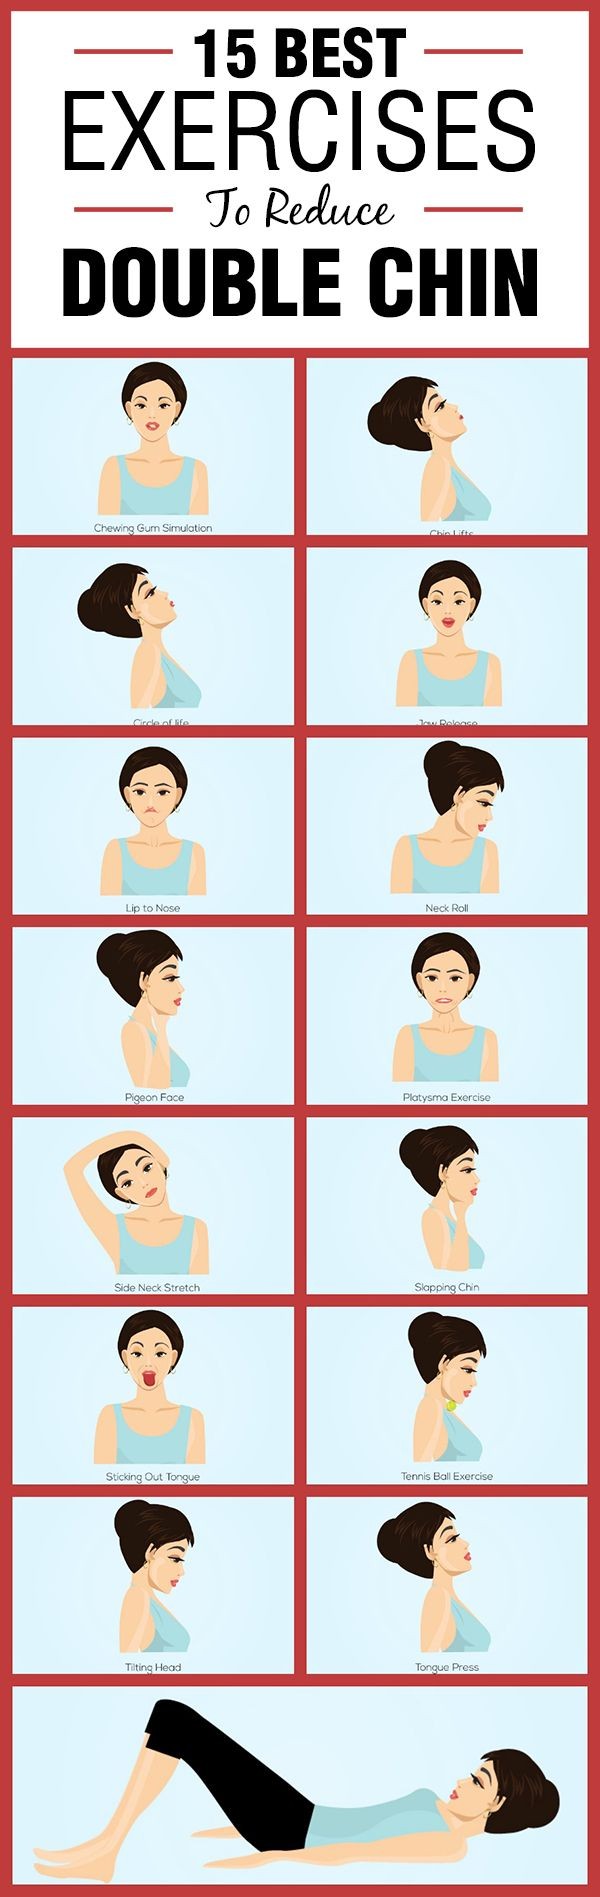 15 Best Exercises to Reduce Double Chin – Si...